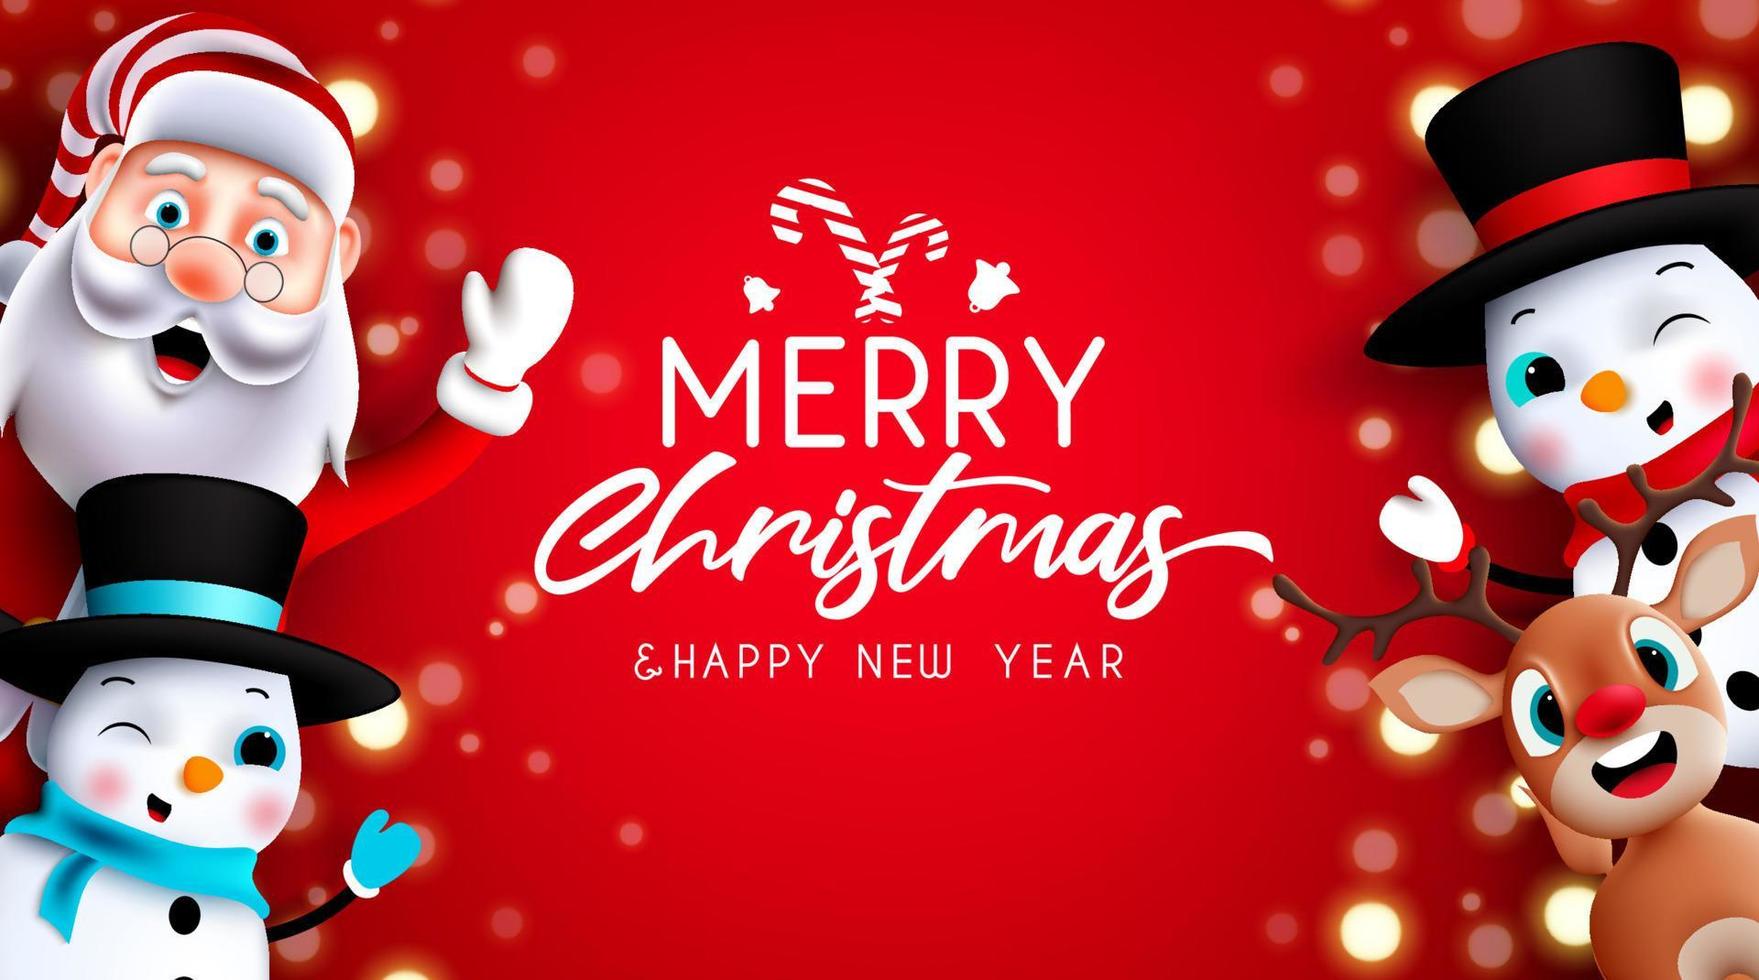 Christmas greeting characters vector design. Merry christmas text with santa claus, reindeer and snowman waving in red background for xmas holiday season. Vector illustration.